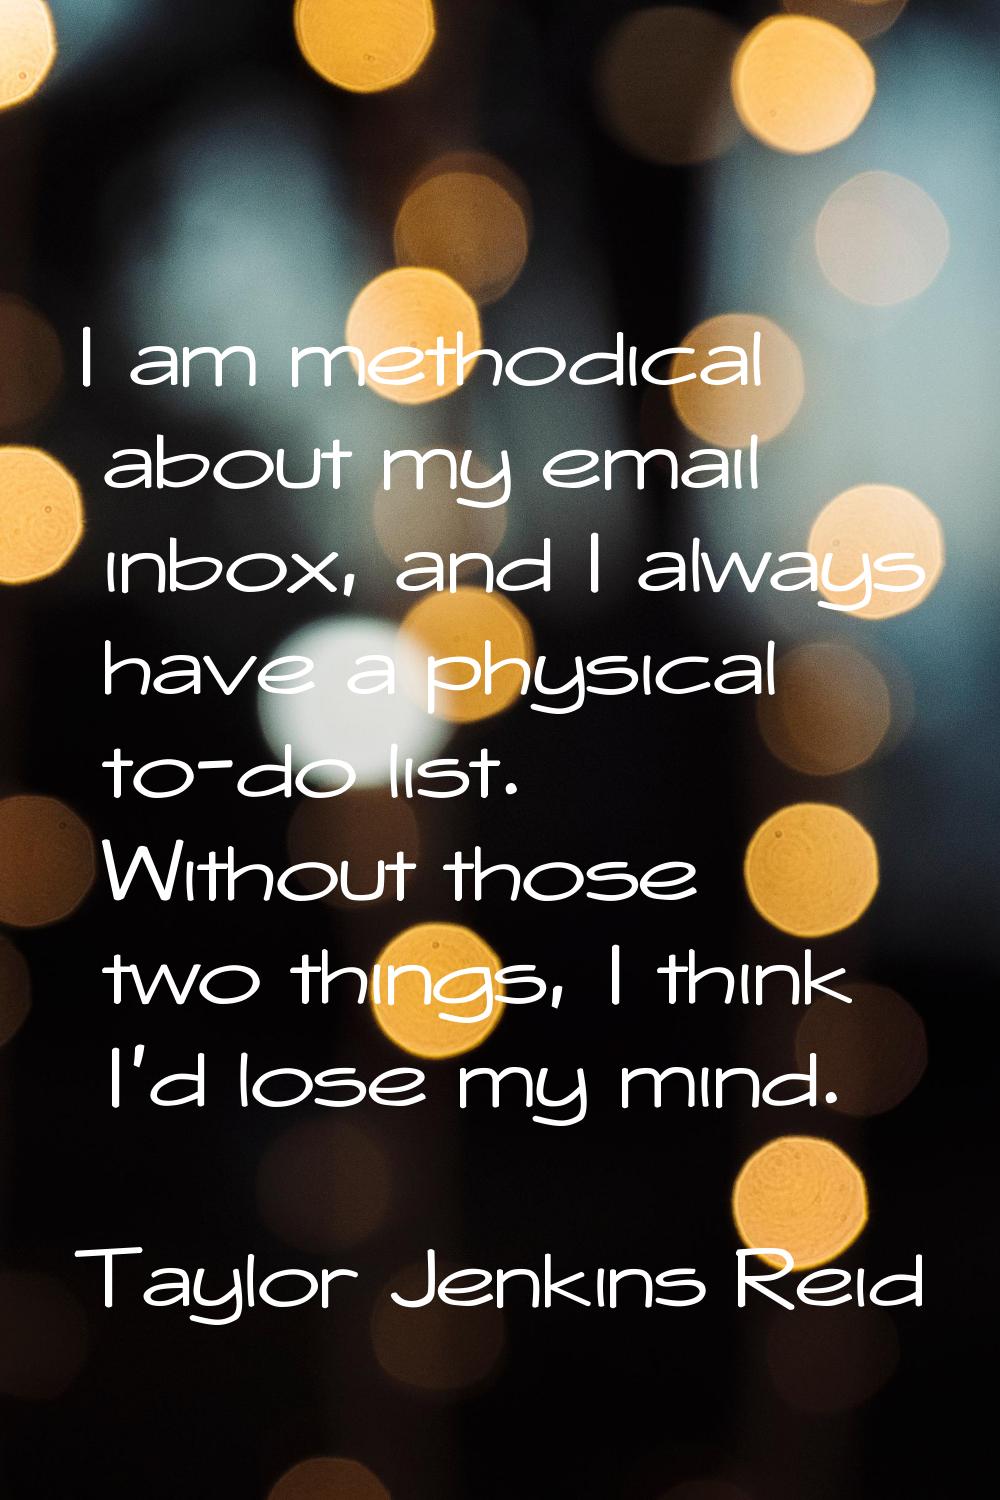 I am methodical about my email inbox, and I always have a physical to-do list. Without those two th